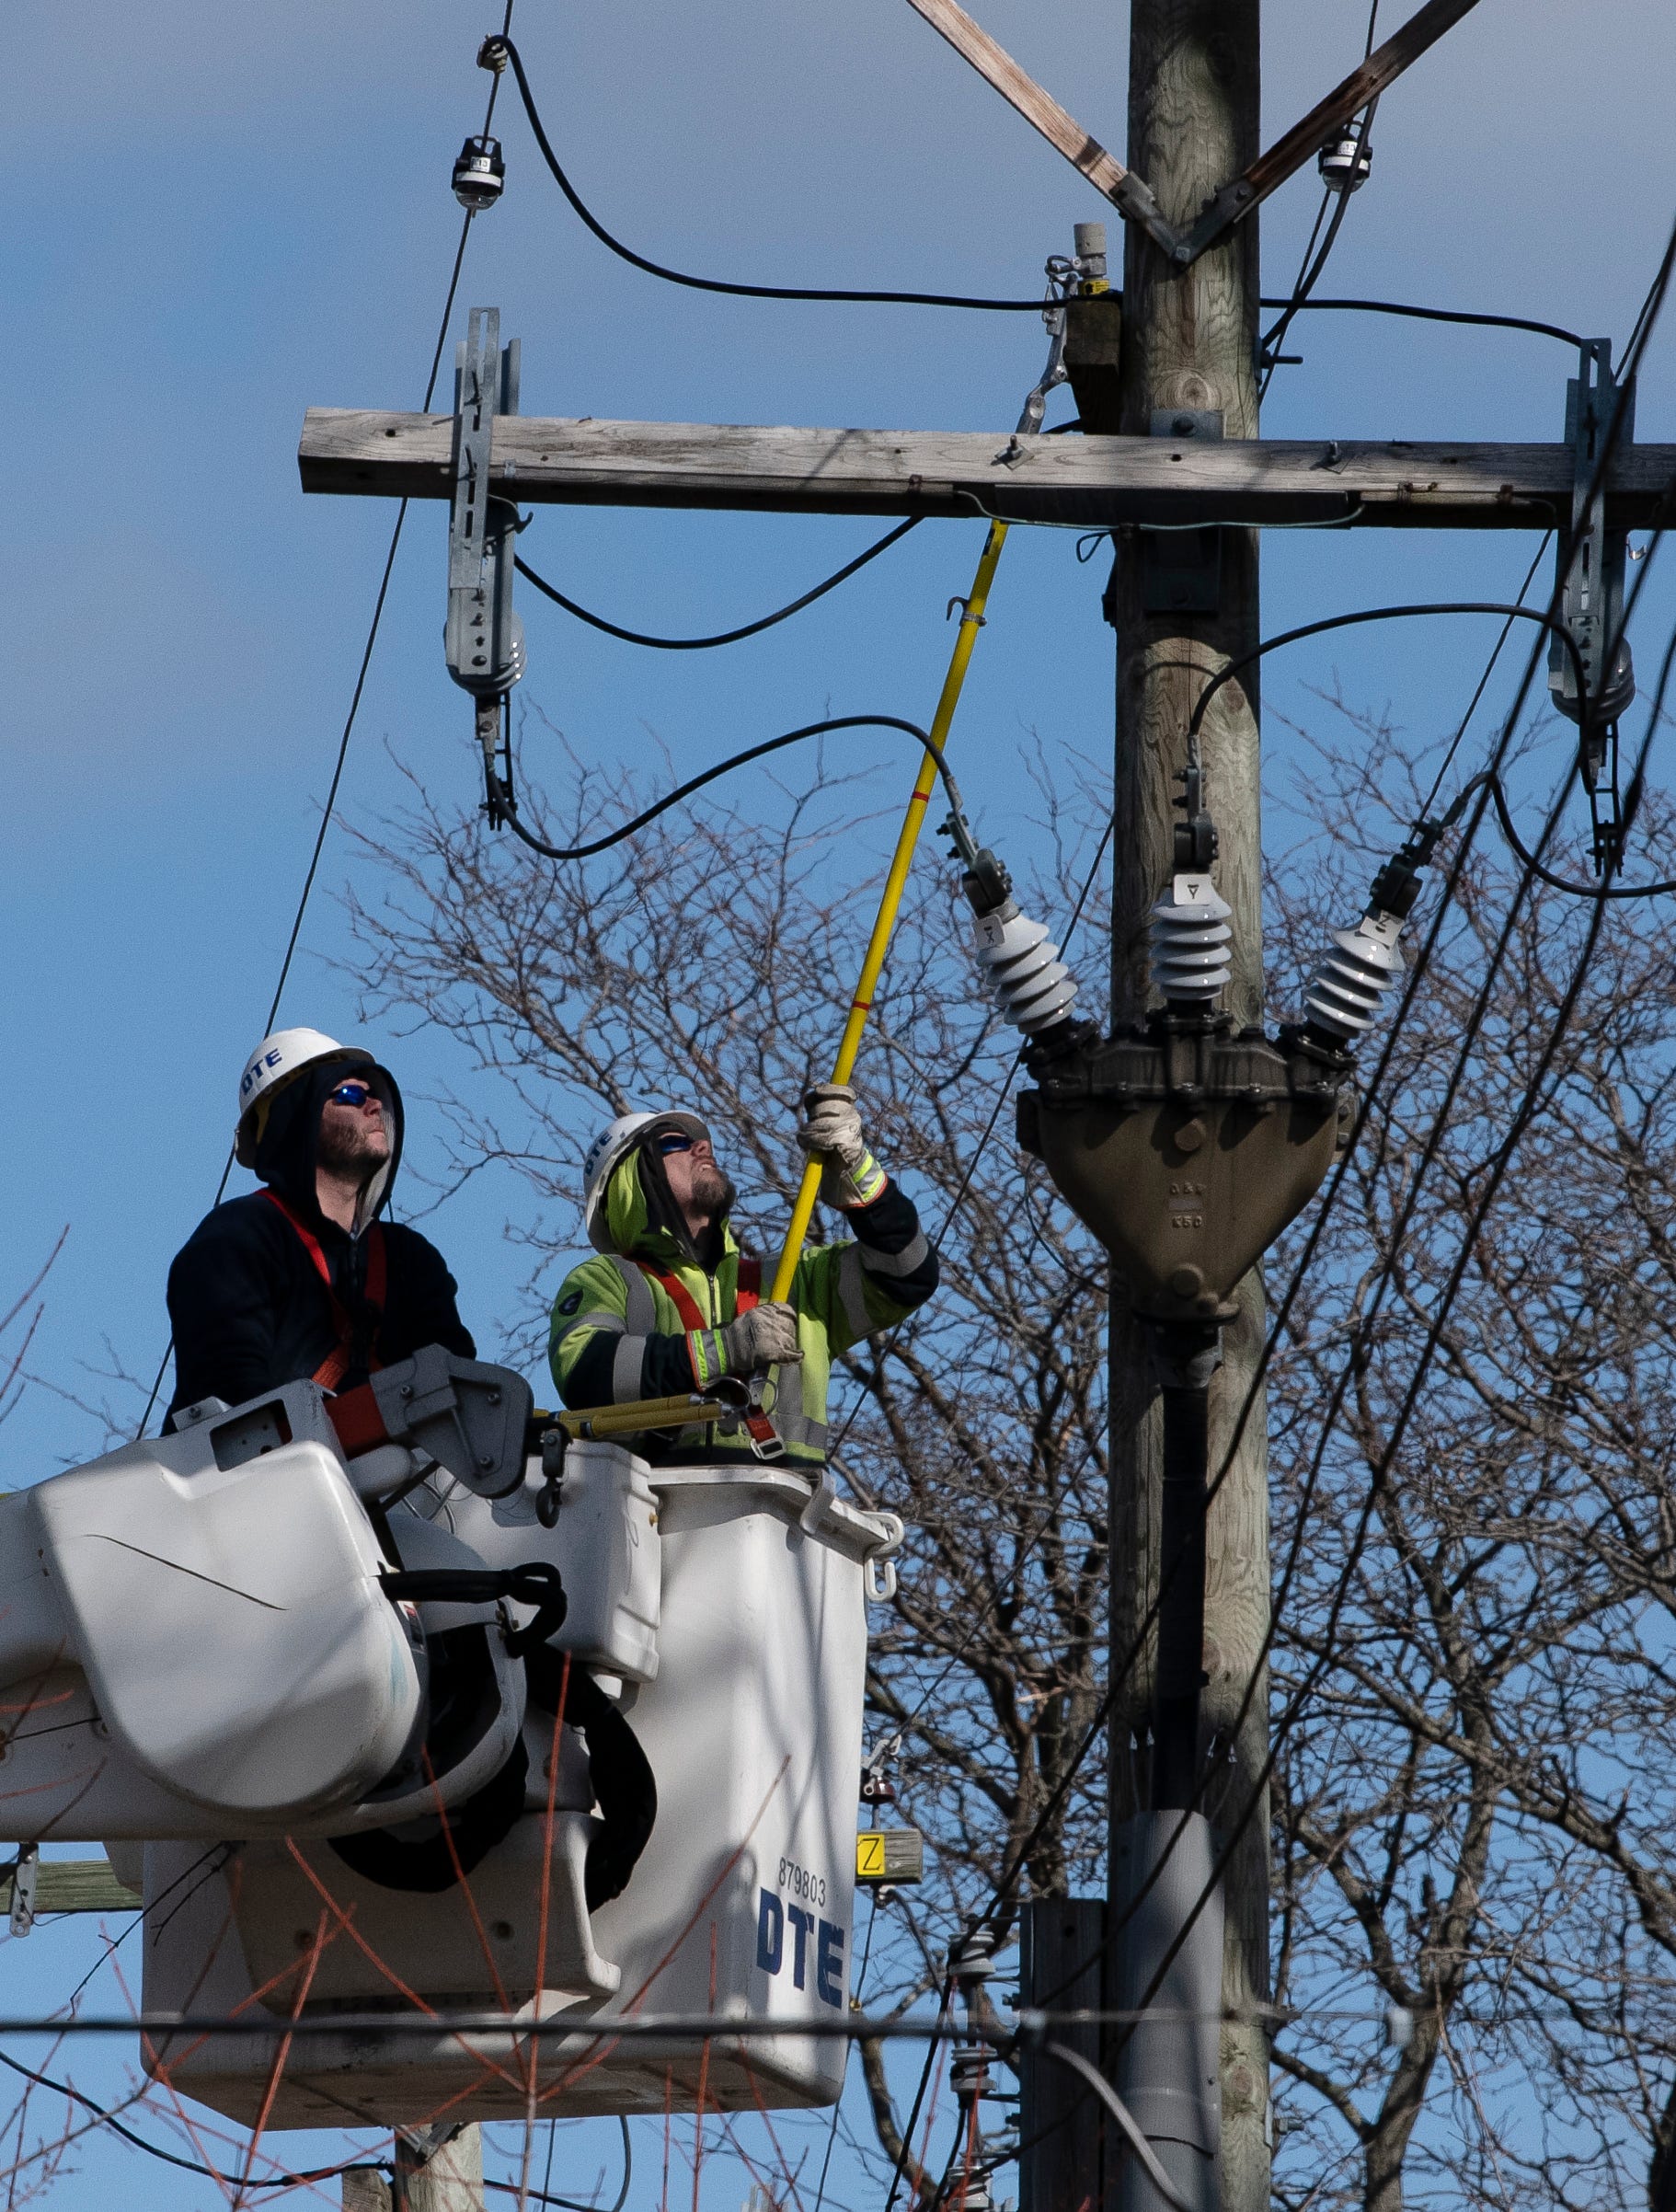 DTE servicemen work to restore electricity to a neighborhood in Grosse Pointe Farms Friday afternoon, February 24, 2023,  after a midweek winter storm coated the area with freezing rain knocking out power to thousands of homes and businesses.